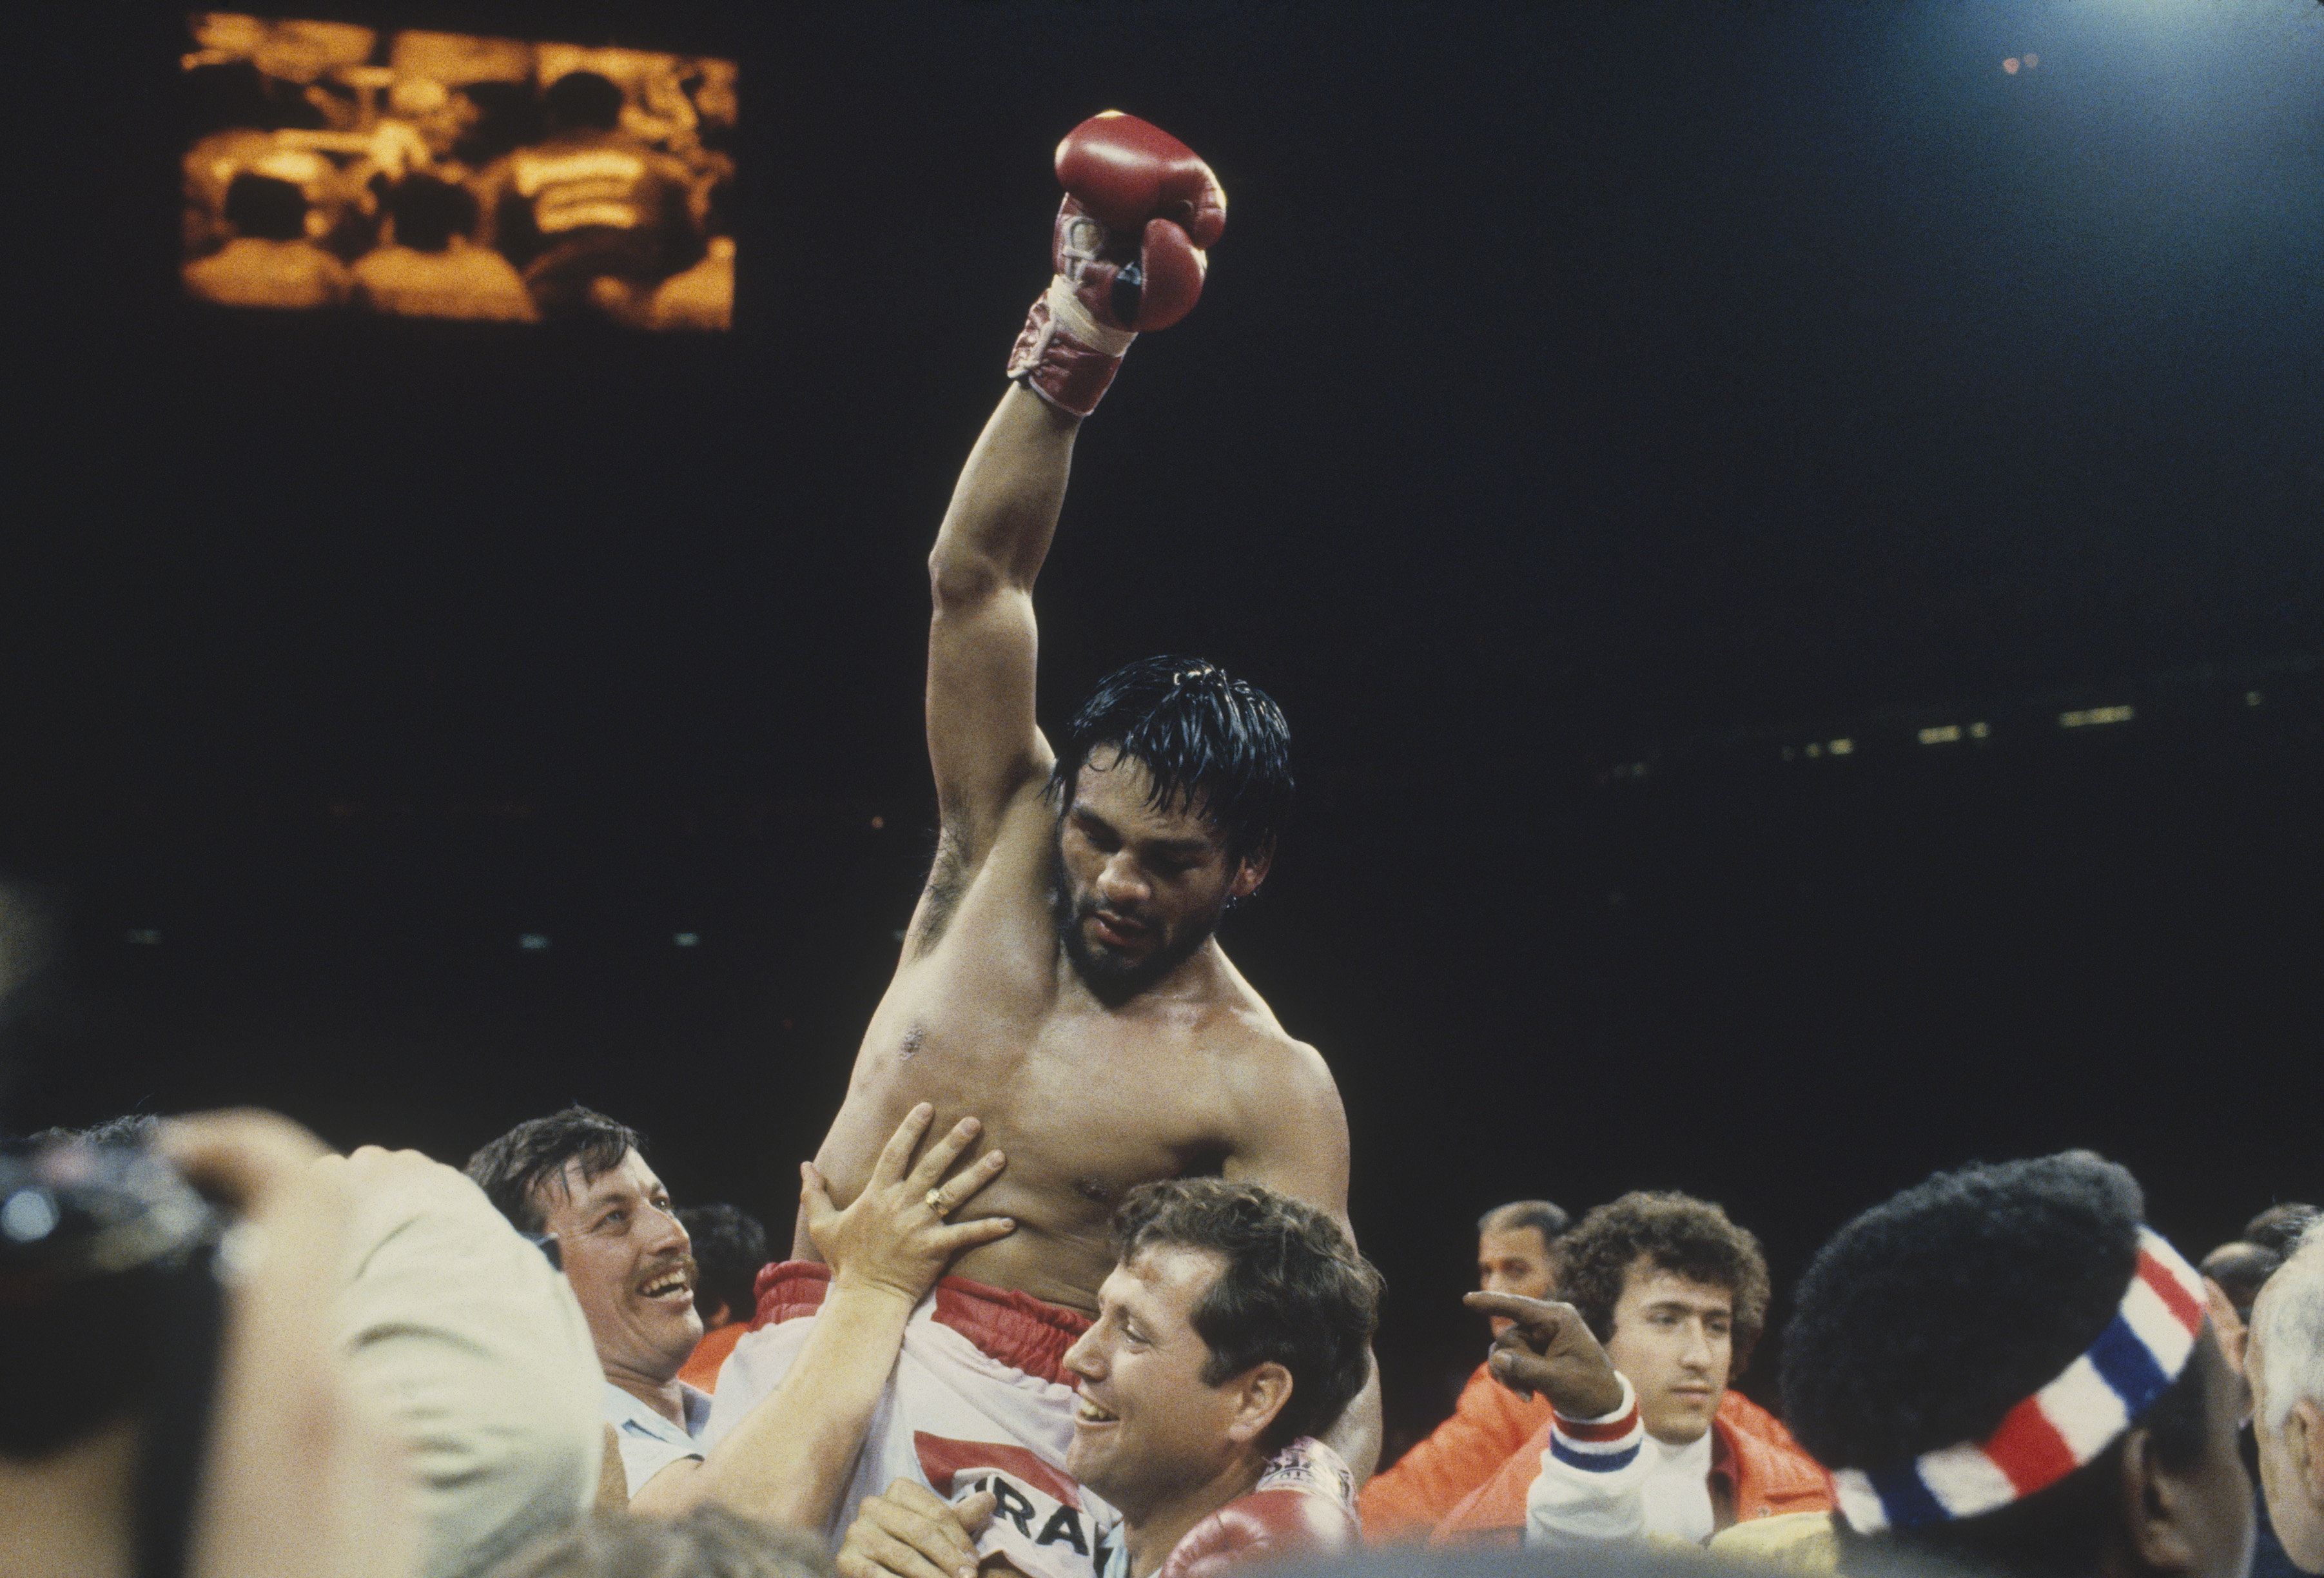 Caption: MONTREAL - CANADA - JUNE 20: Roberto Duran celebrates in the ring after he defeated "Sugar" Ray Leonard during their fight at The Forum in Montreal, Canada on June 20, 1980. Roberto Duran won on a 15-round decision to win the World WBC Welterweight Title. (Photo by Focus on Sport/Getty Images)